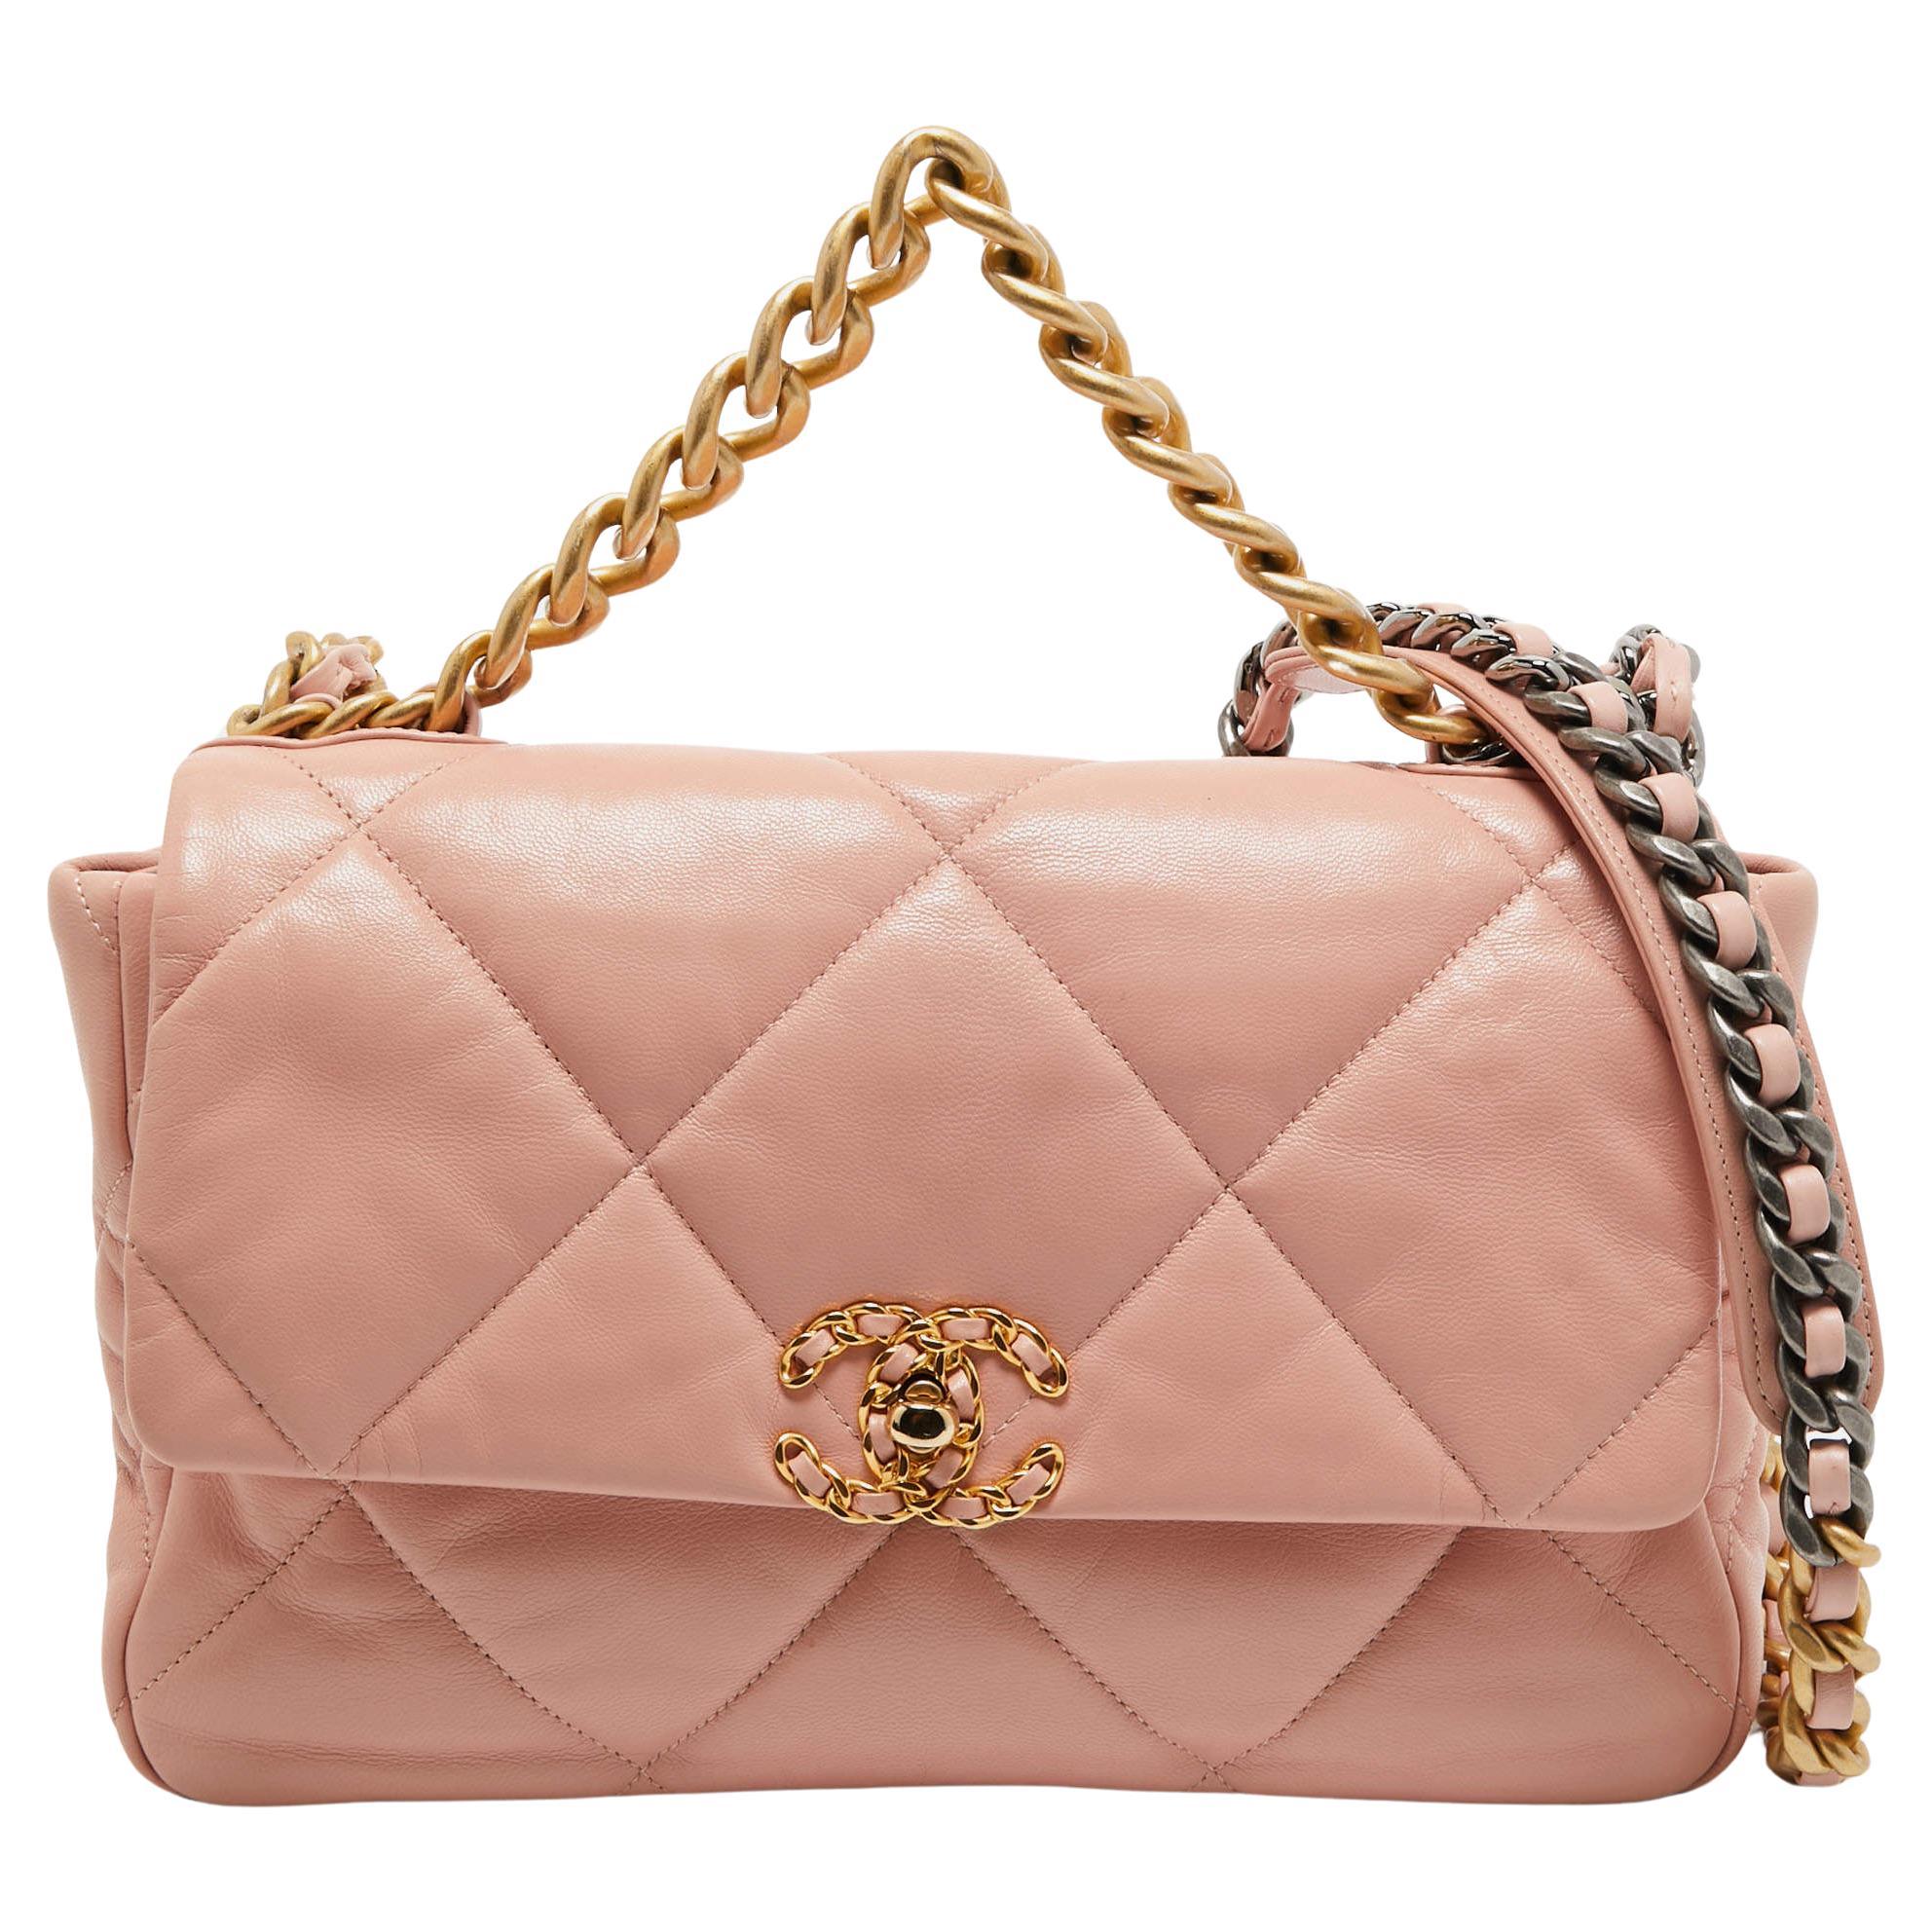 Chanel Pink Quilted Leather Large 19 Flap Bag For Sale